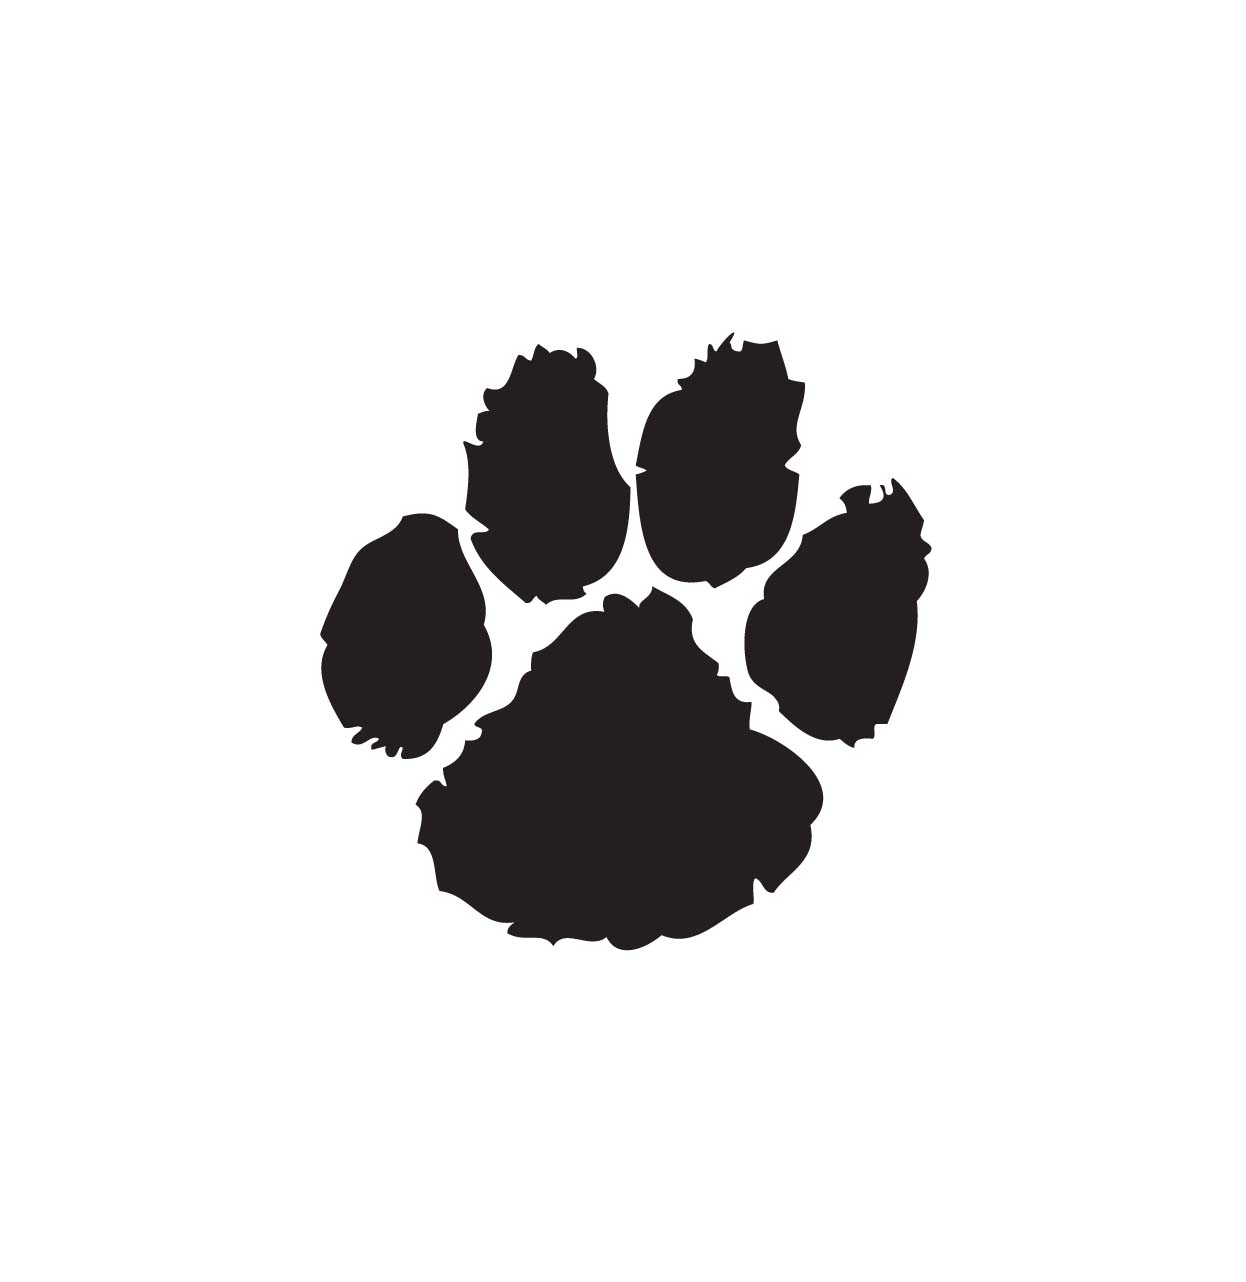 Bulldog paw print free clipart images - Cliparting.com